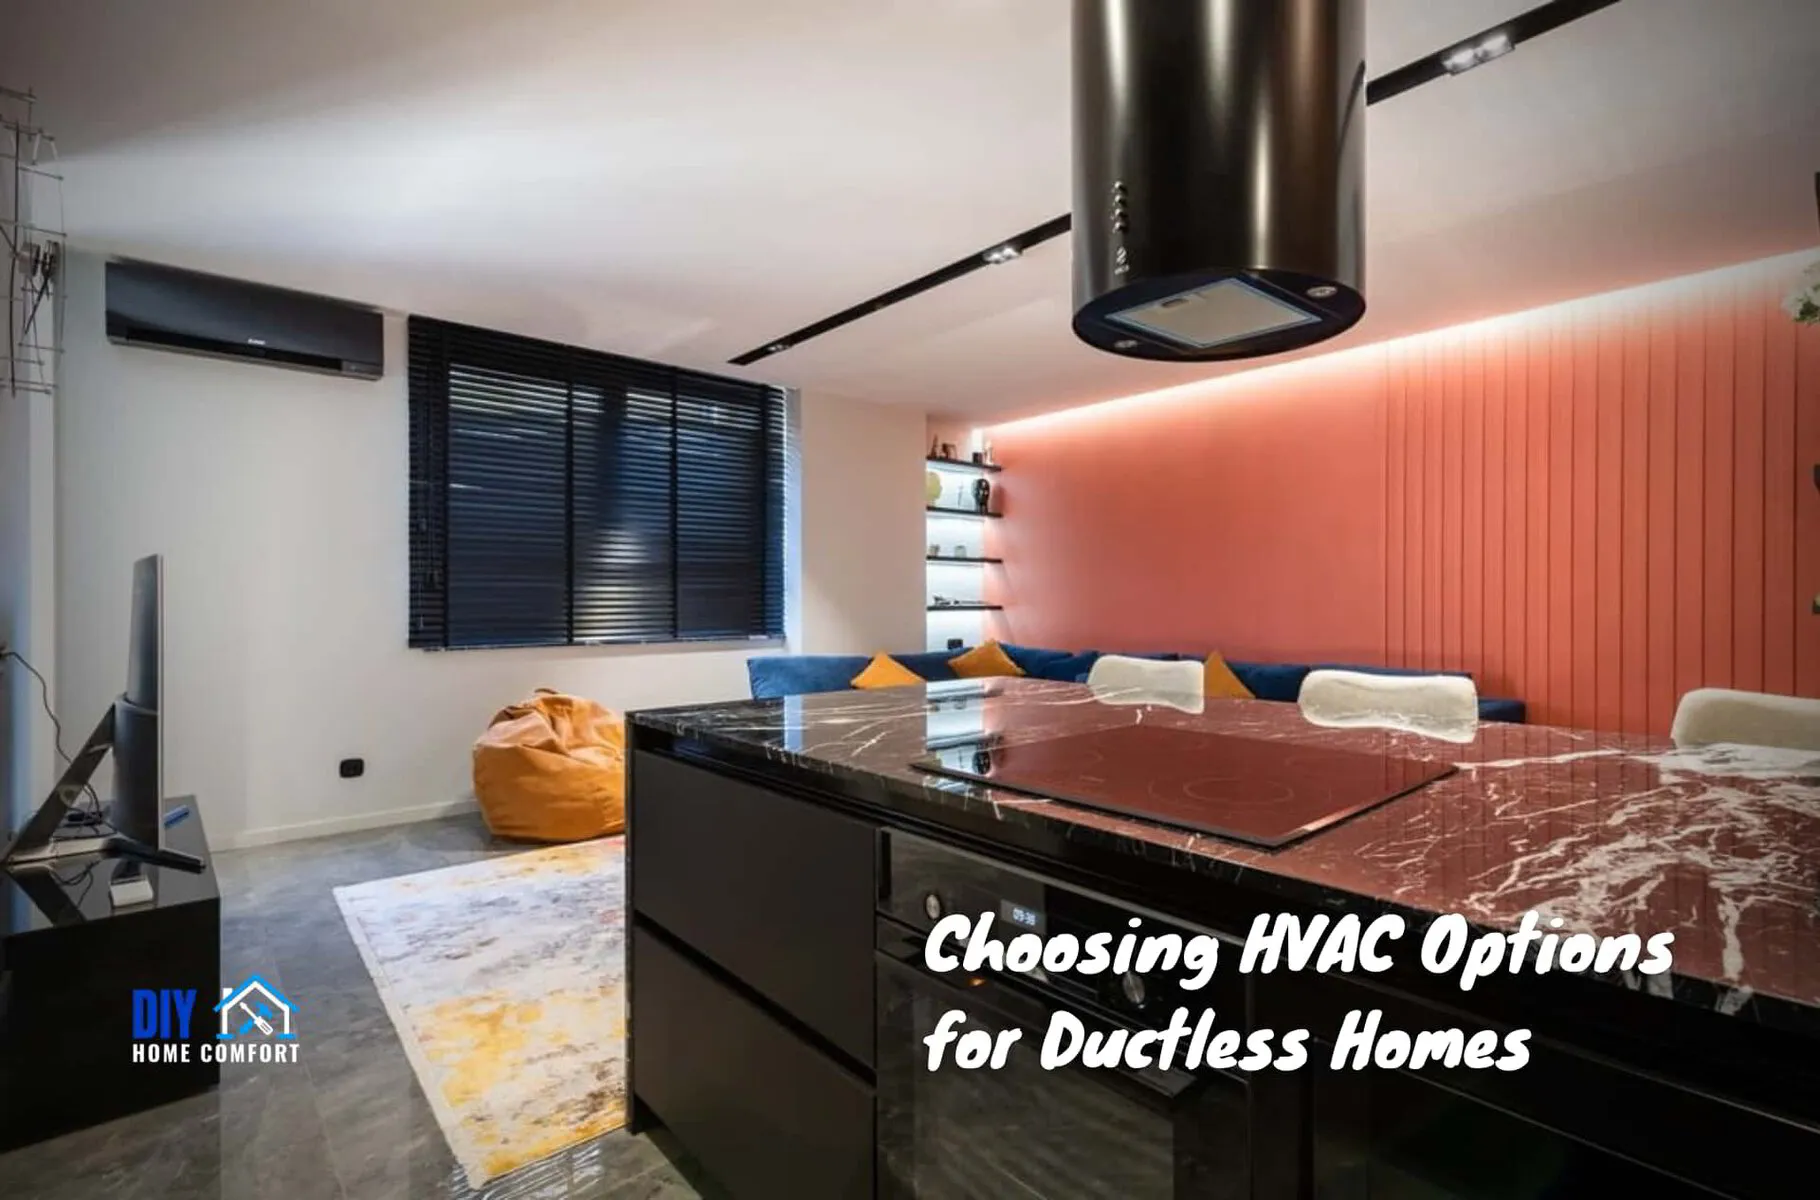 Choosing HVAC Options for Ductless Homes | DIY Home Comfort